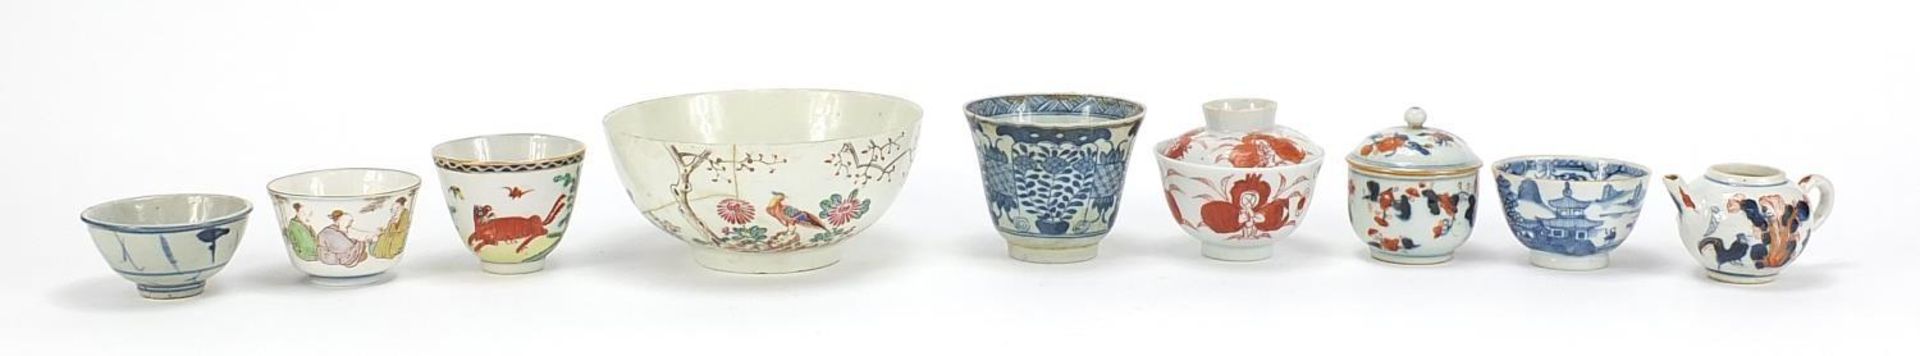 Chinese and European ceramics including tea bowls and Imari palette teapot, the largest 15.5cm in